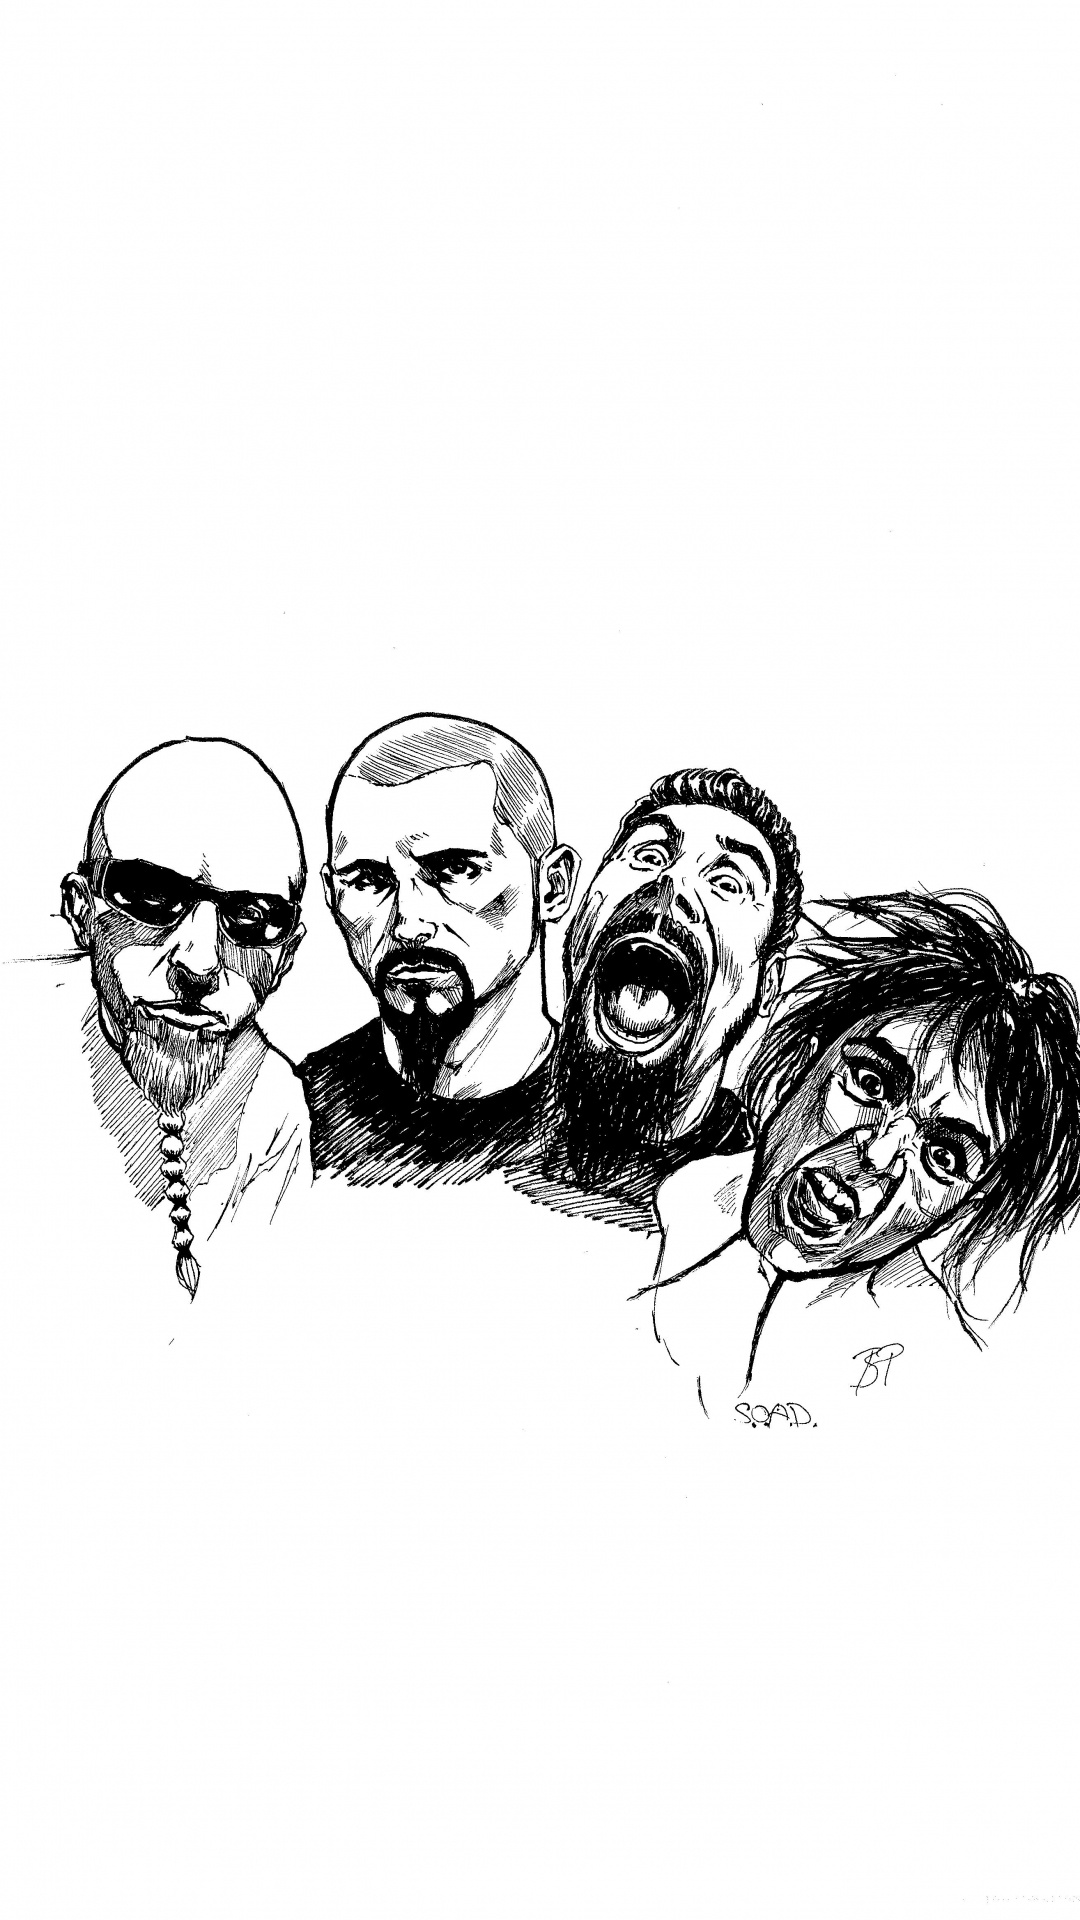 System Of A Down, Portrait, Ensemble Musical, Dessin, Esquisse. Wallpaper in 1080x1920 Resolution